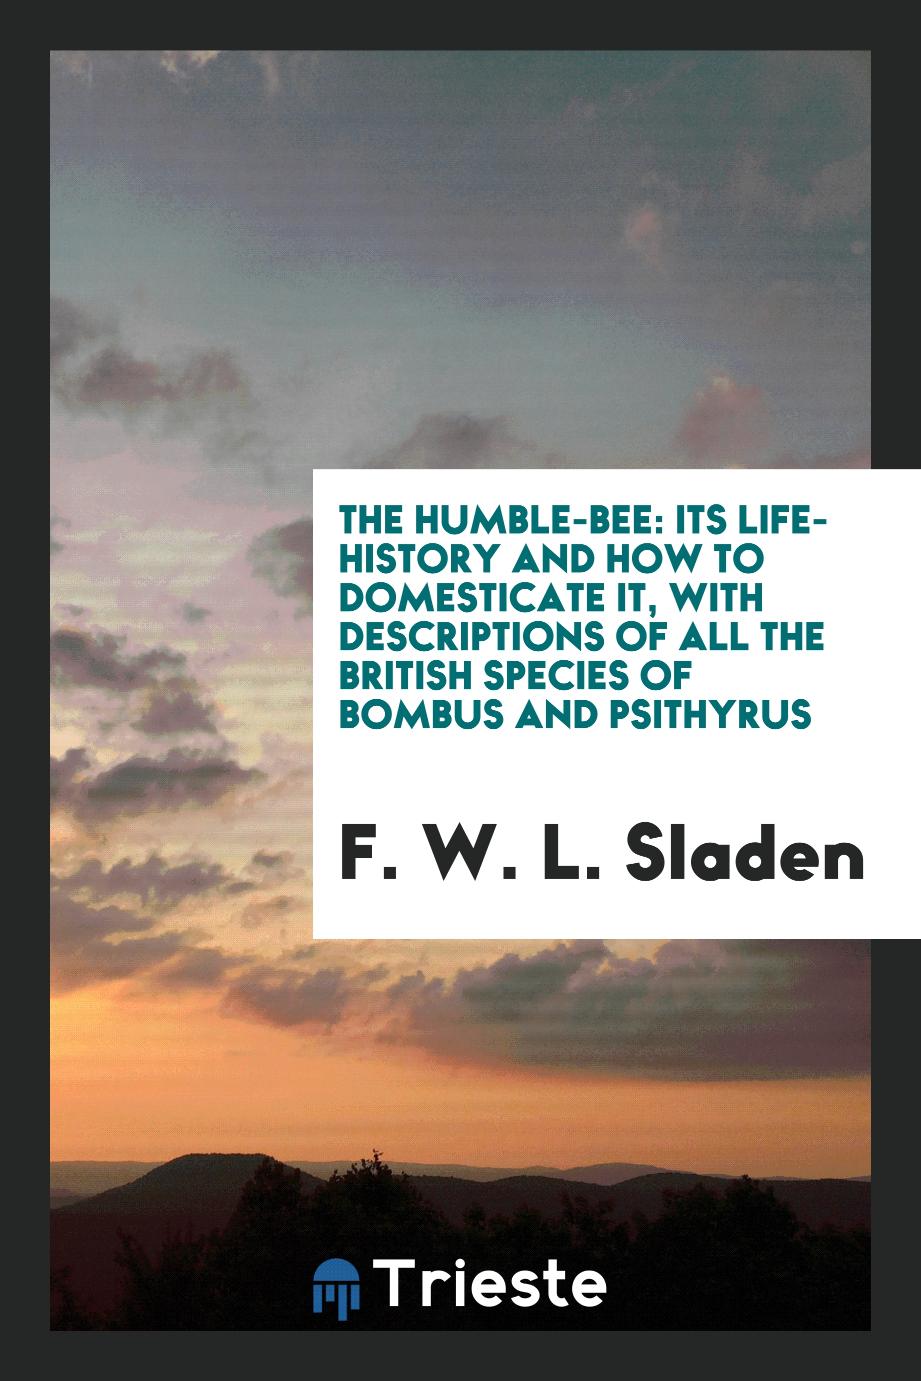 The Humble-Bee: Its Life-History and How to Domesticate It, with Descriptions of All the British Species of Bombus and Psithyrus